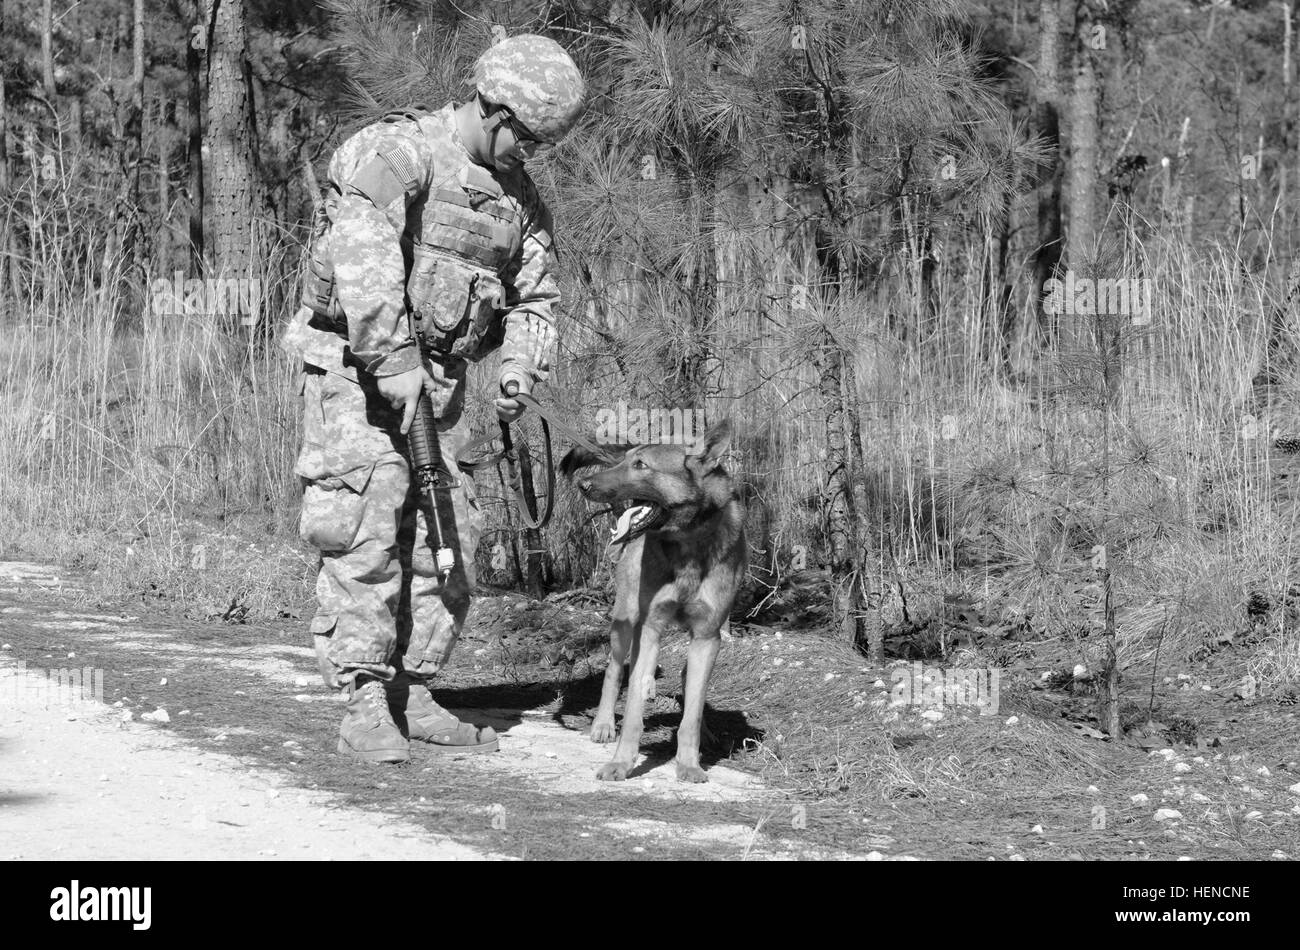 Pfc. Nicholas C. Hinderliter of Detroit and military working dog Sgt. Roger, a 2-year-old German Shepherd, both assigned to 550th Military Working Dog Detachment, 503rd Military Police Battalion, 16th MP Brigade, Fort Bragg, search for explosives along a road on Fort Bragg, N.C., March 11, 2014. Staff Sgt. James A.C. Hall of Pennsylvania supervises the training event. (U.S. Army photo by Sgt. Barry St. Clair) Dog and handler training 140311-A-UK859-179 Stock Photo